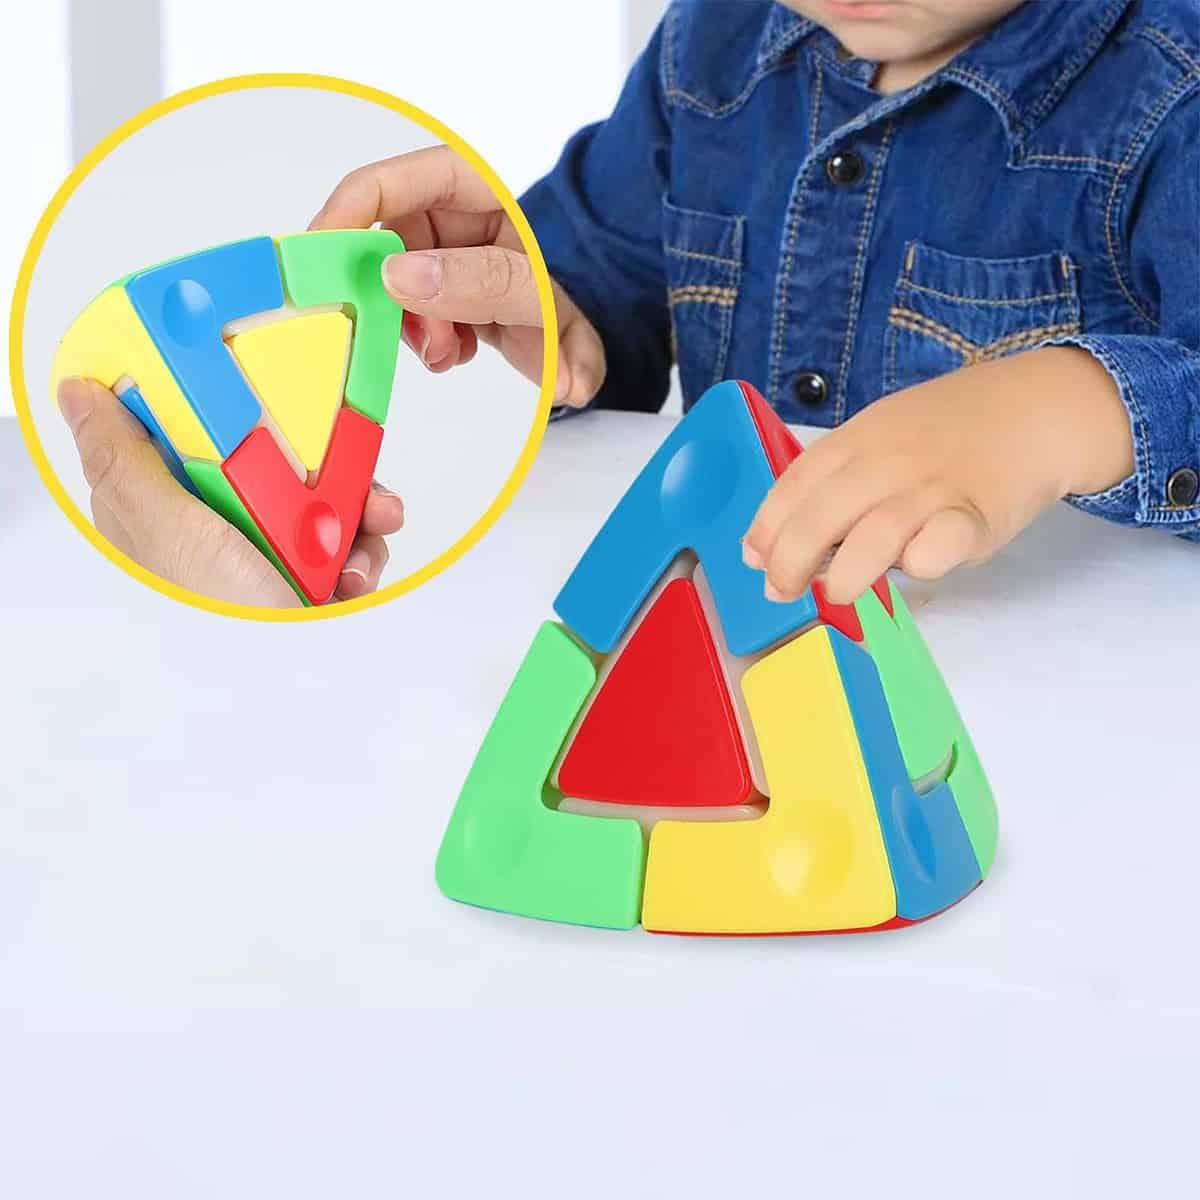 Cube Puzzles Toy Brain Teasers Unique Birthday Smoothly Sensory toy Puzzle Toys Sensory fidget for Mini Gadget adult Beginner